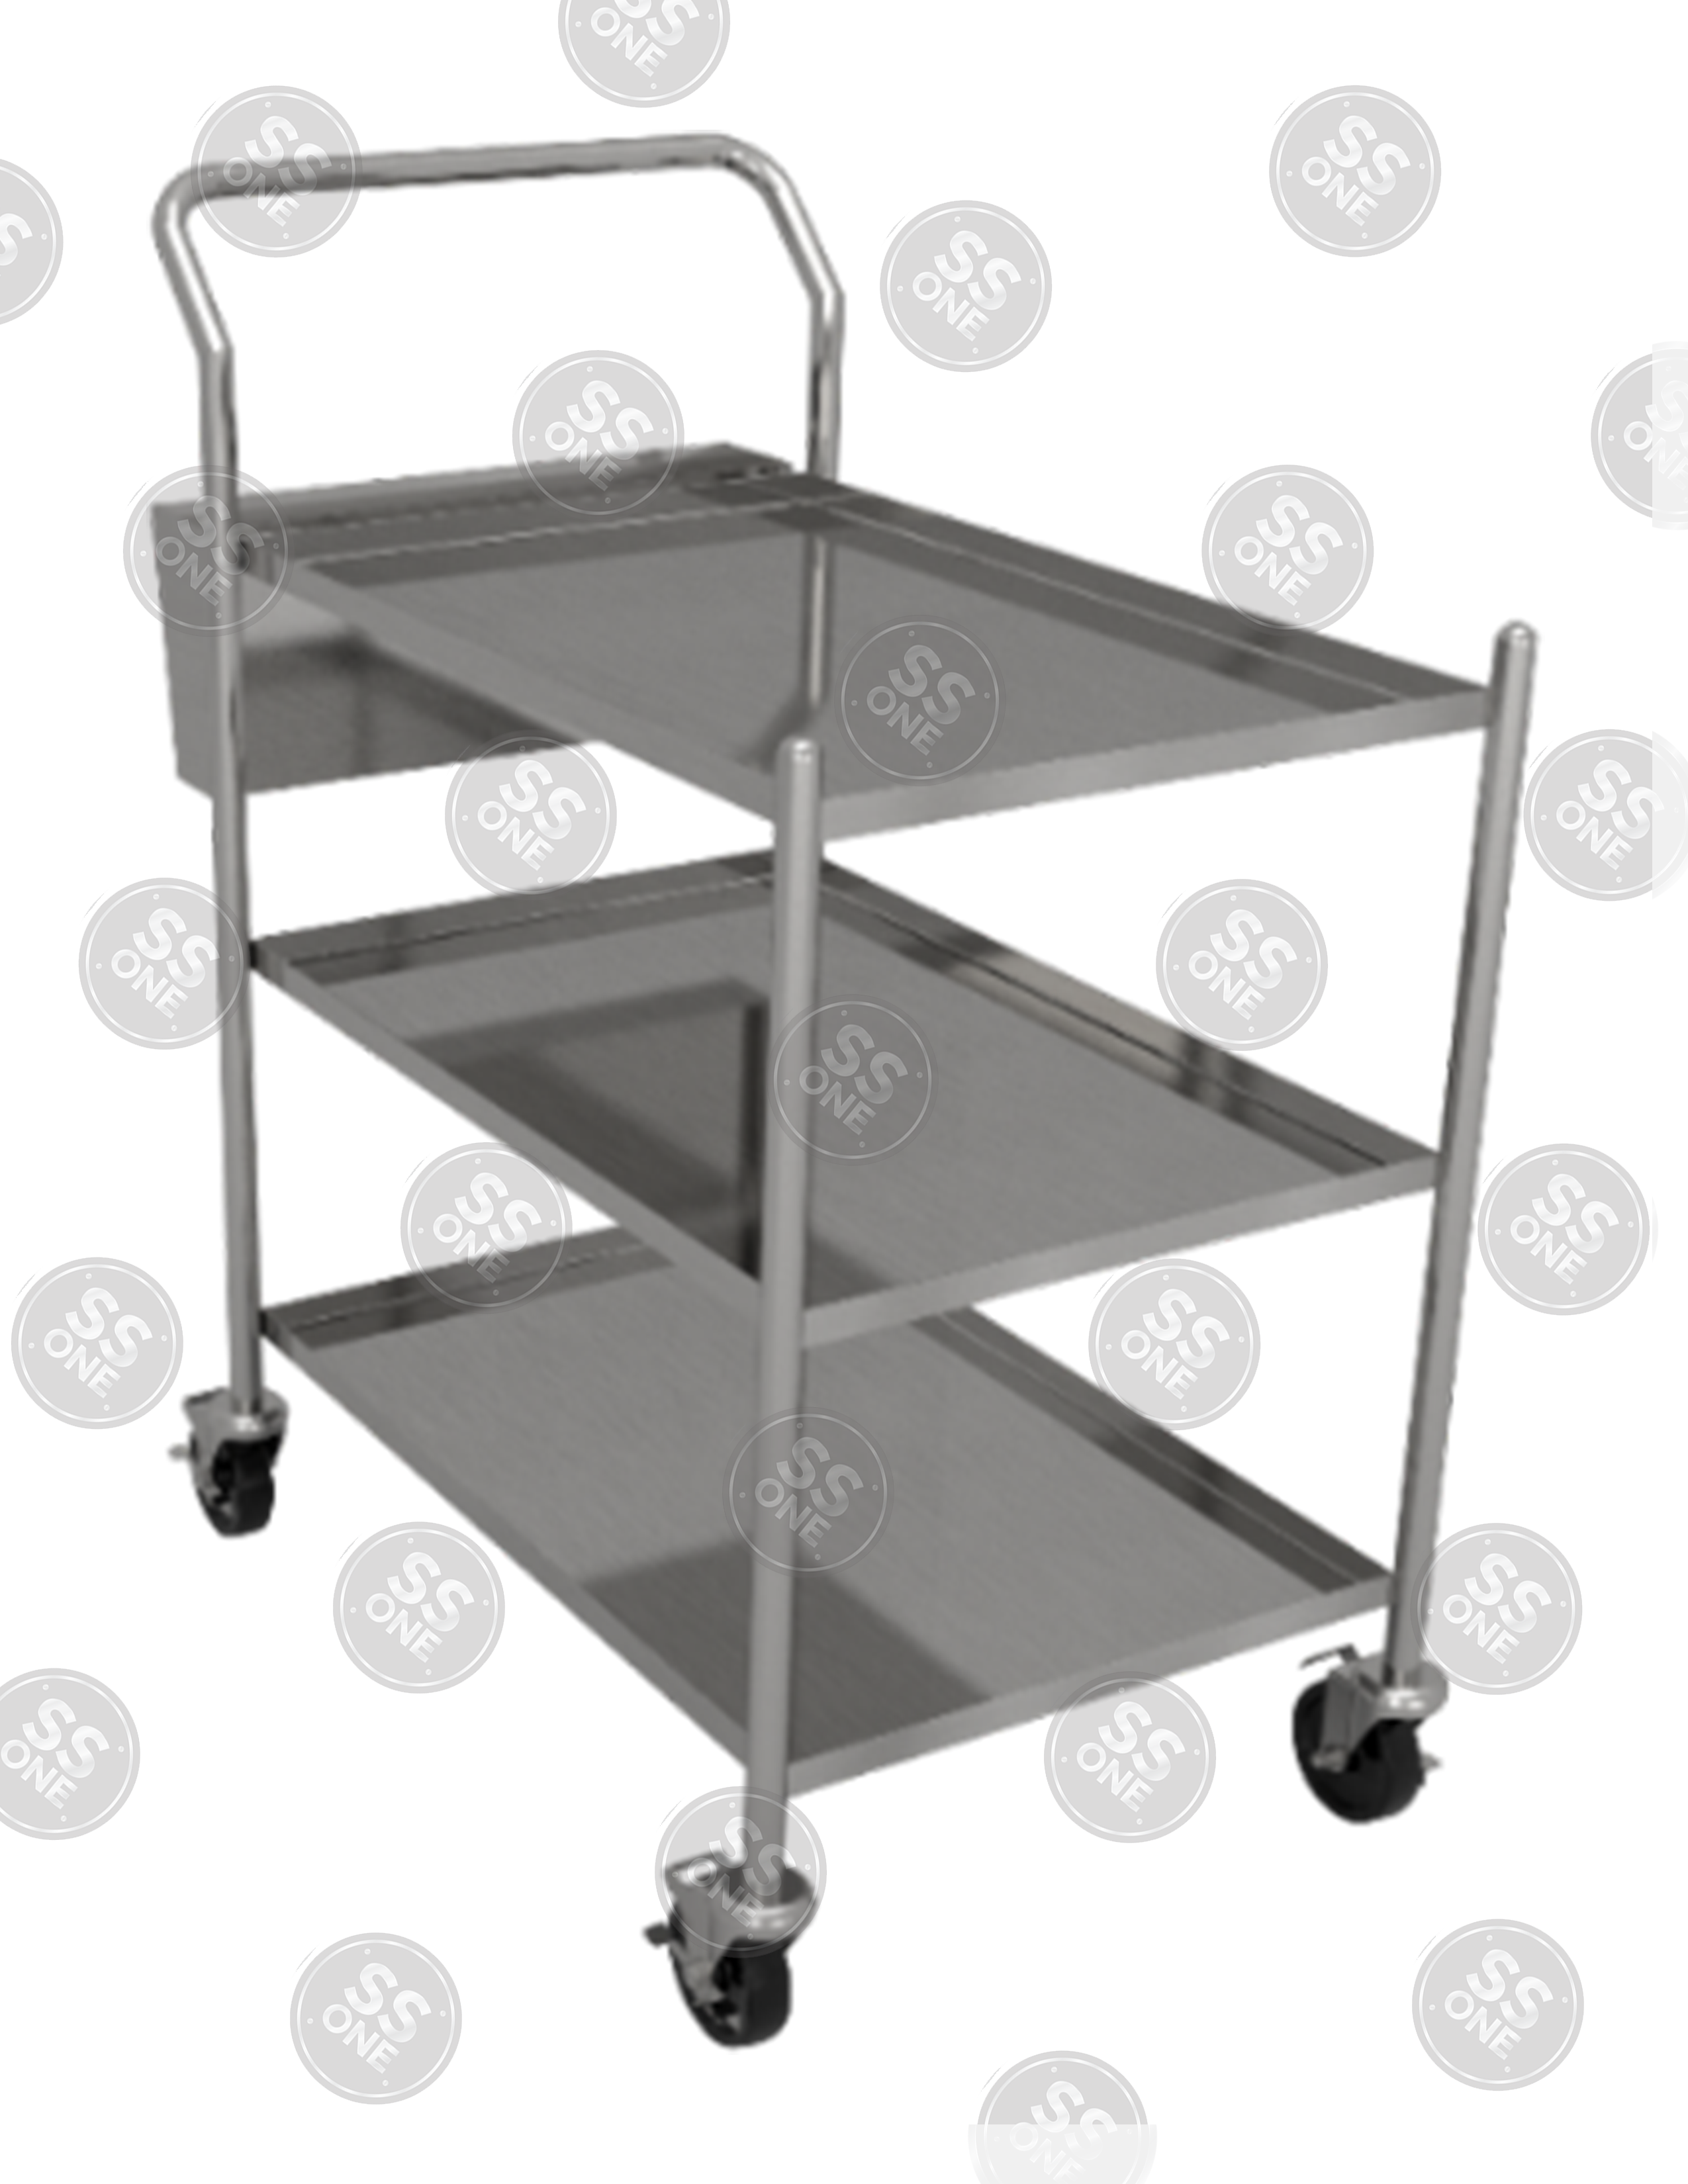 UTILITY CART 2 LAYERS WITH SILVER WARE BIN 